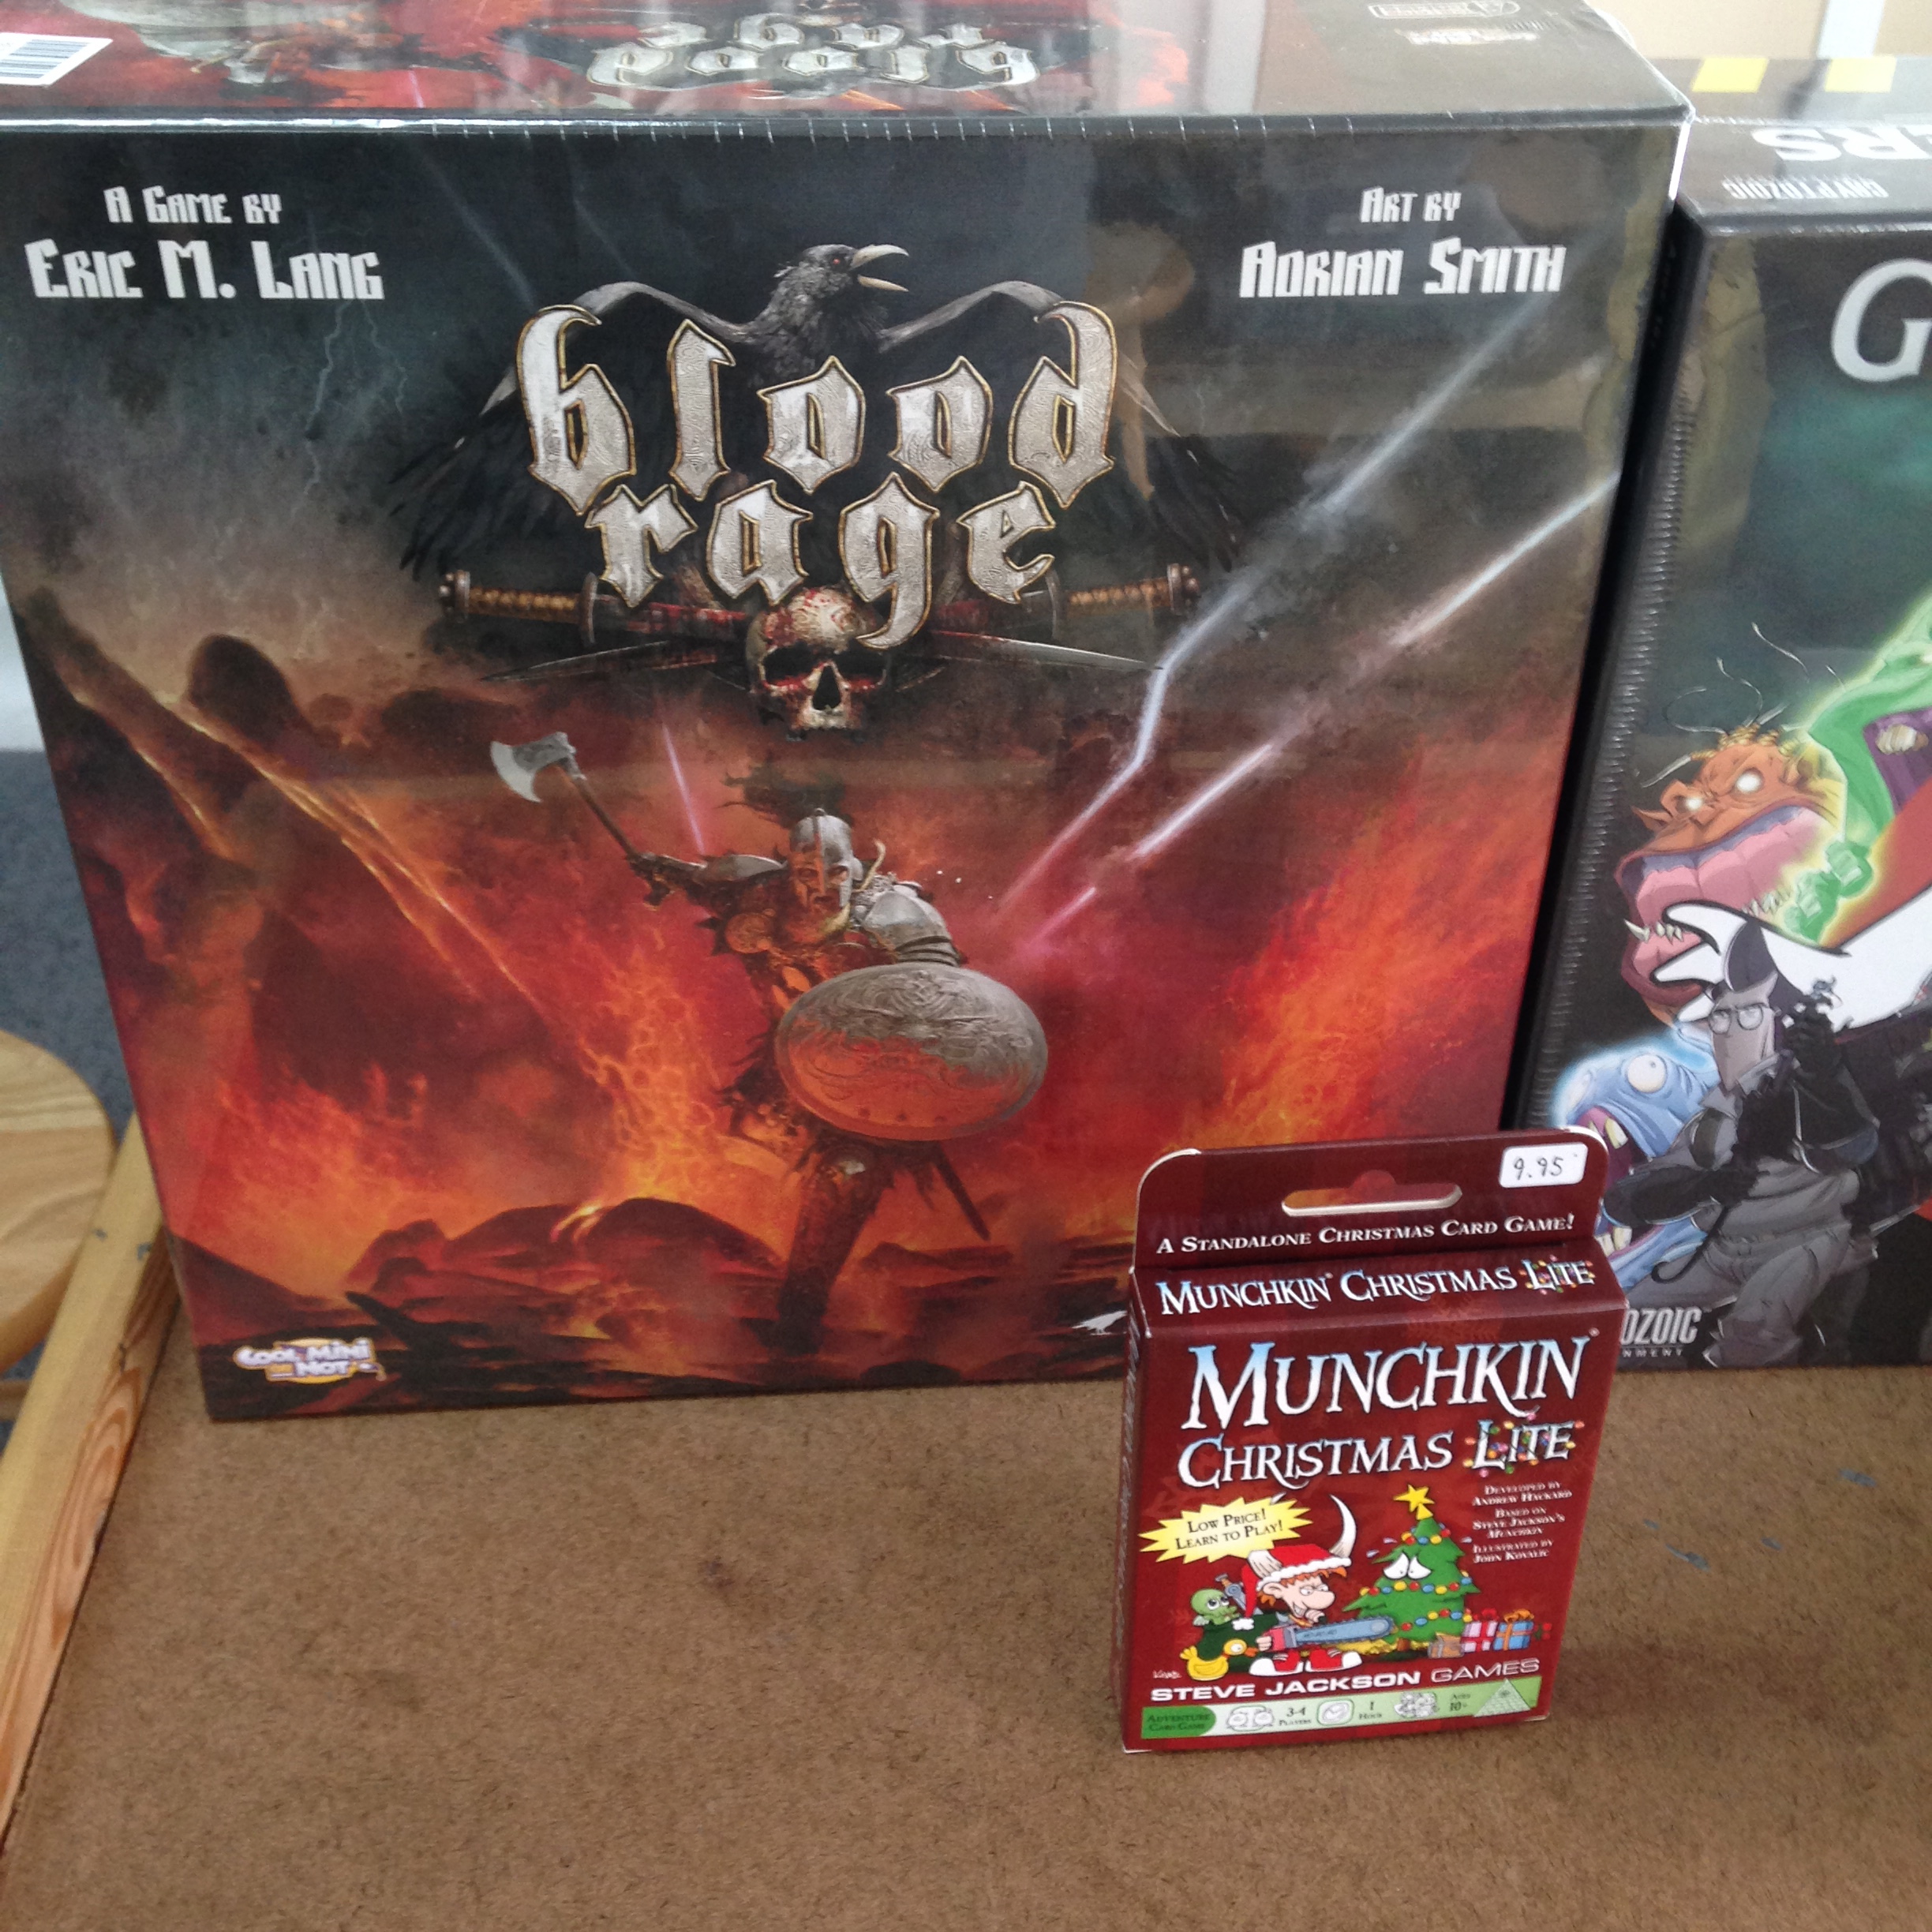 New in the Store 11/27/15 Blood Rage and Munchkin Christmas Light